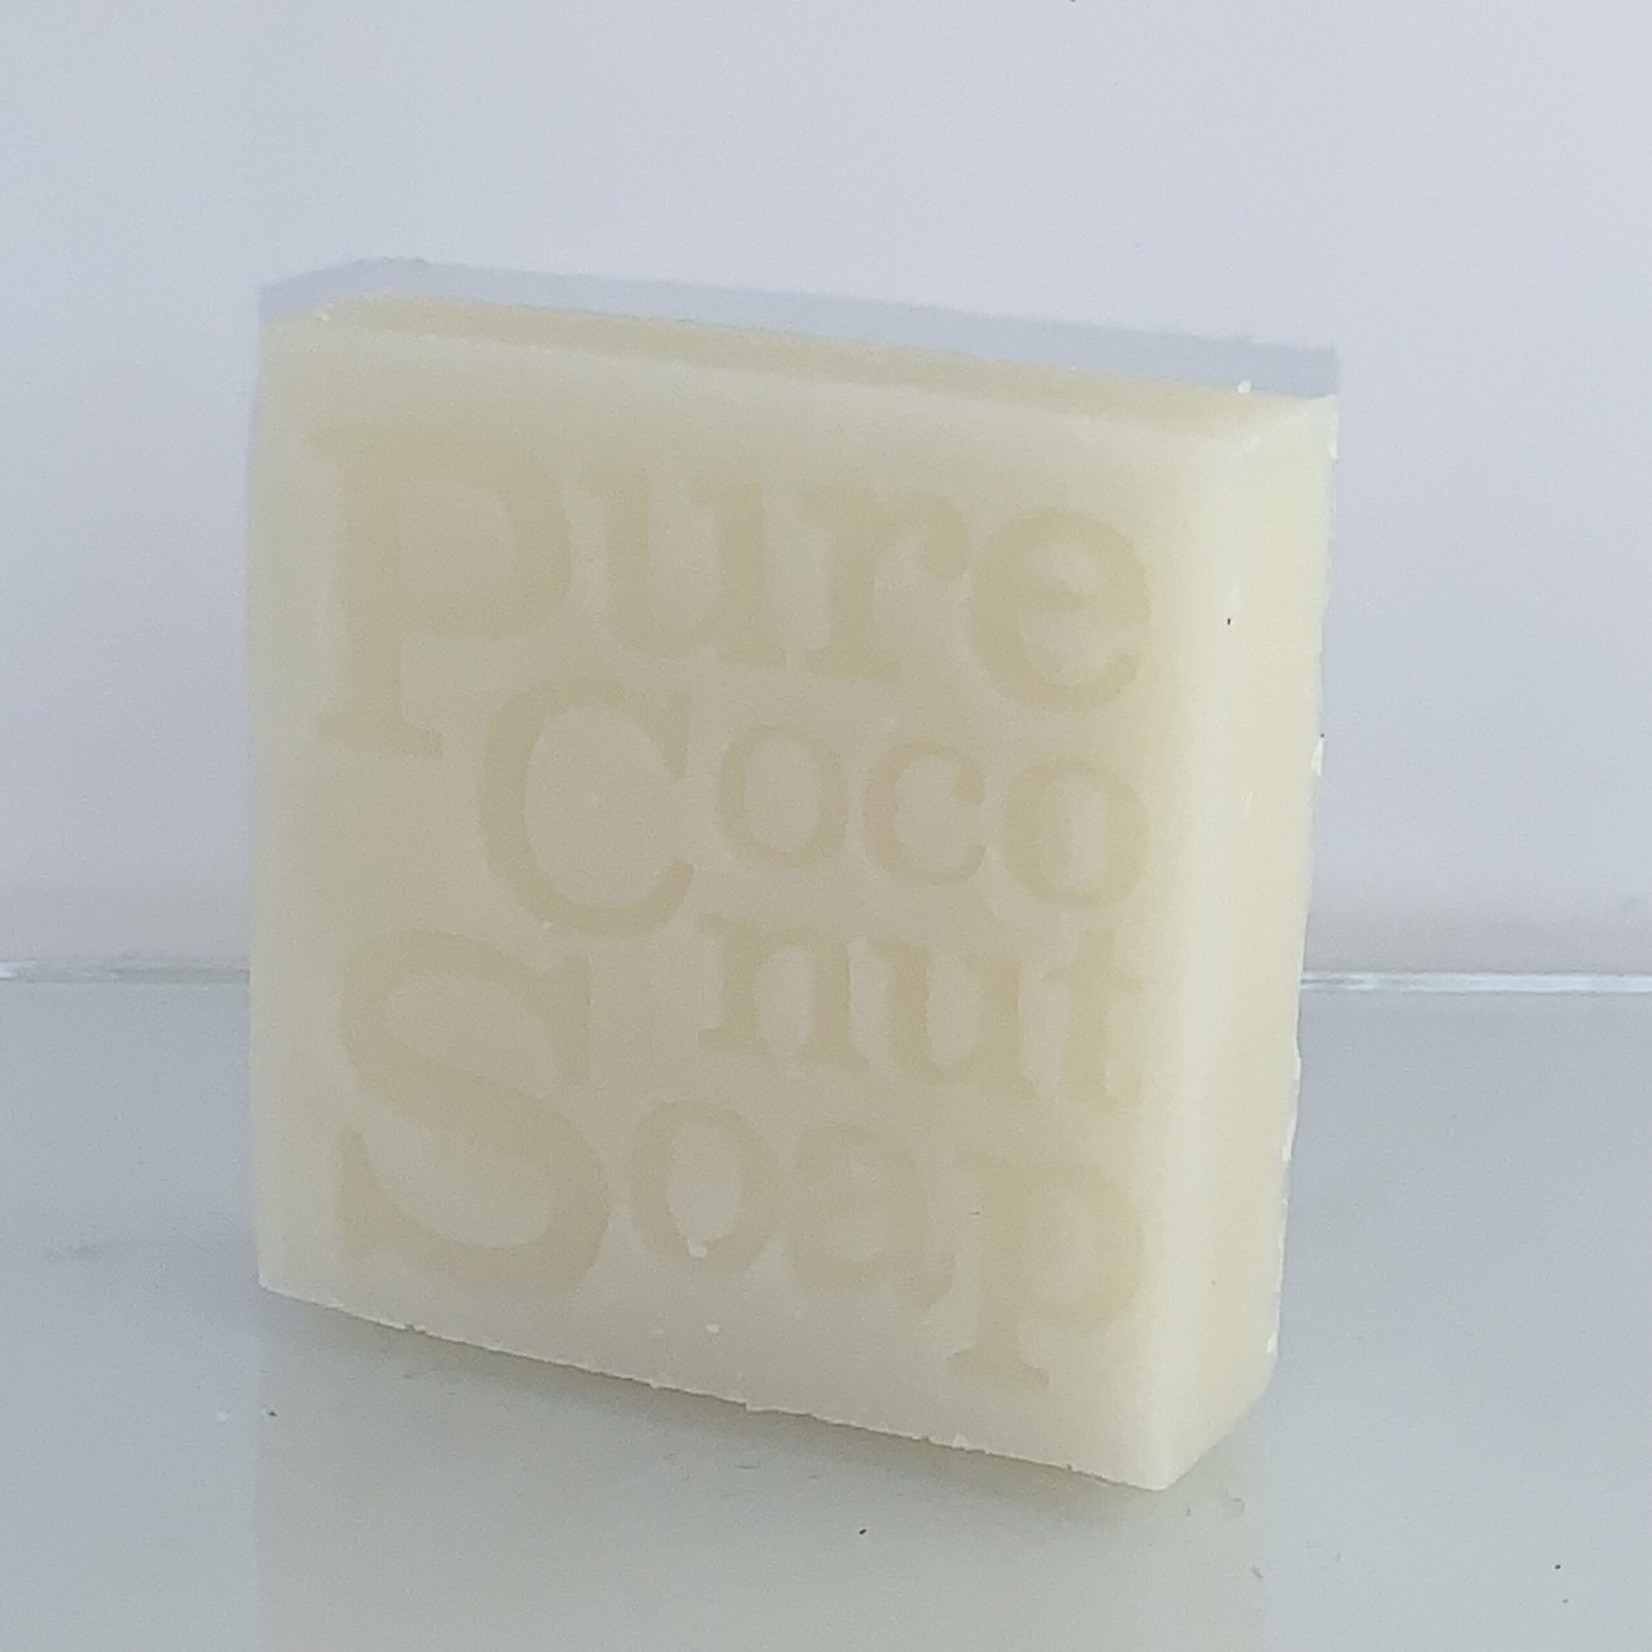 Corrynne's Natural Skincare Corrynne's Natural Skincare Soap